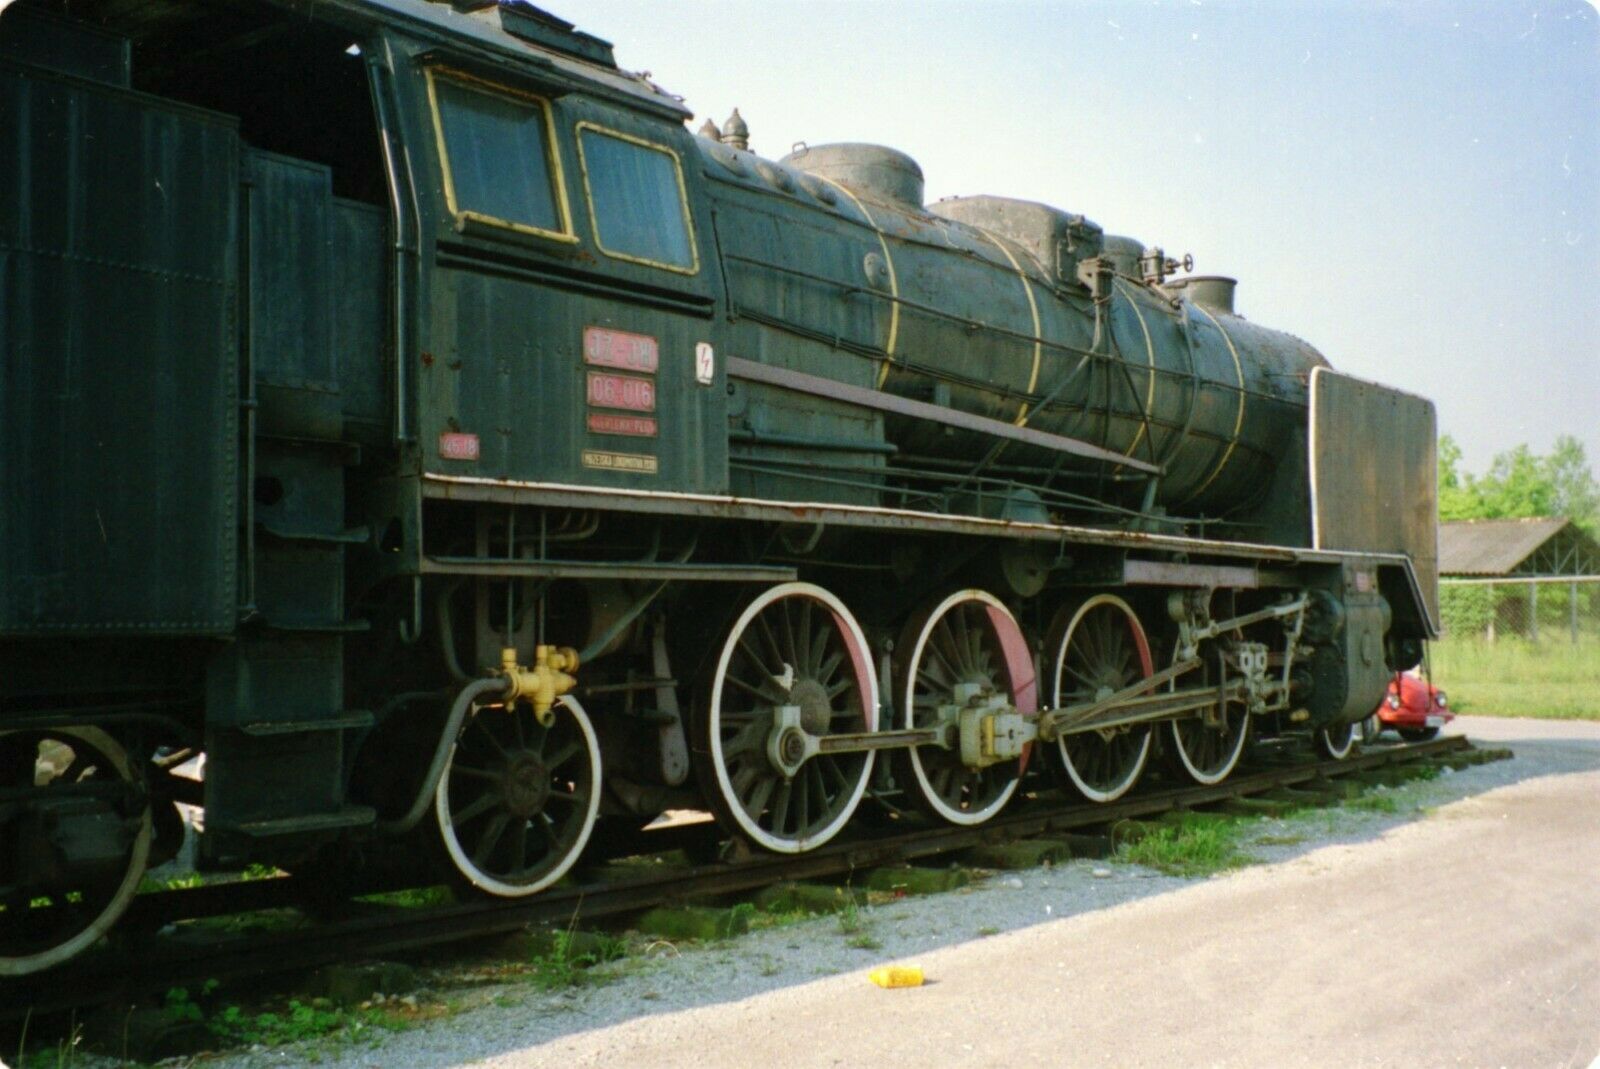 s-l1600 LOCO SLOVENIAN JZ 06-016 IN SIDINGS FRONT VIEW.jpg